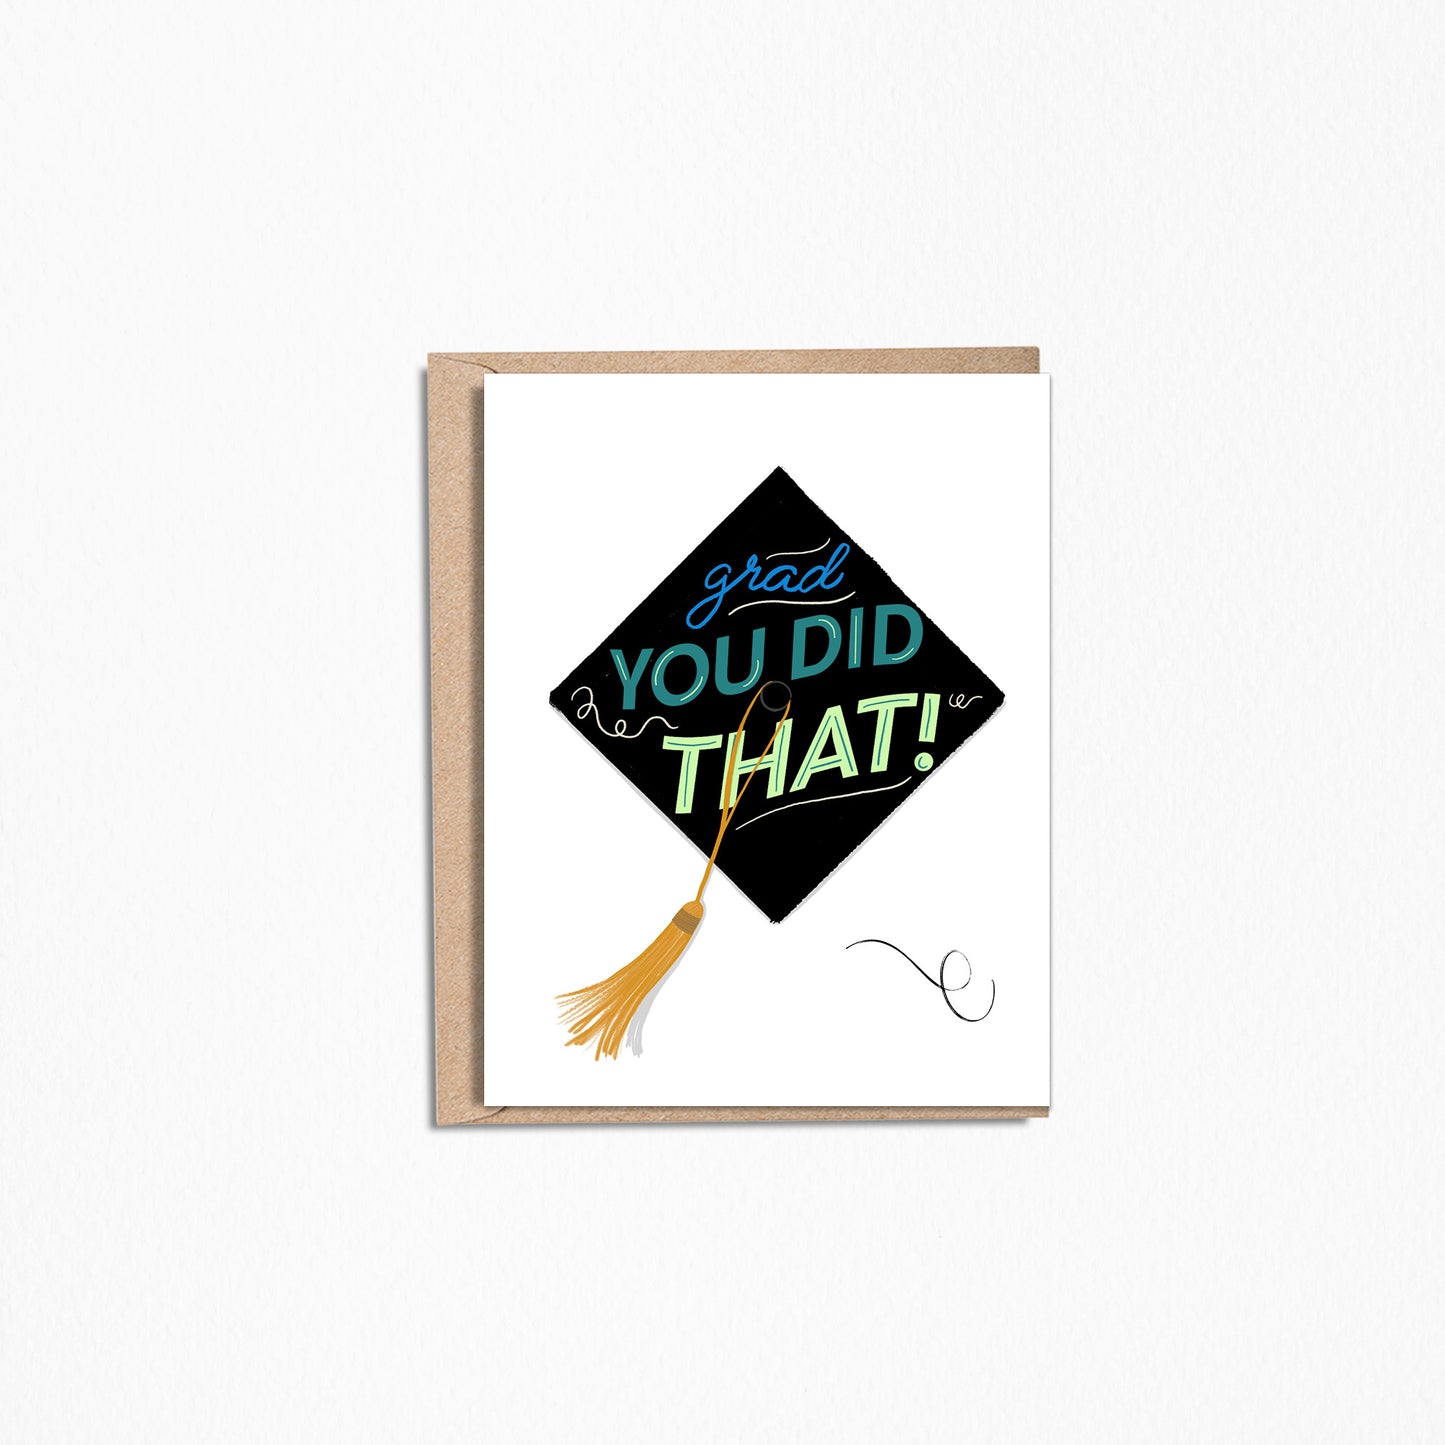 You Did That Grad 4.25x5.5”, Graduation, celebrate, college graduation, congratulations, achievement, big opportunity, greeting cards from Goods Made By Digitrillnana, Ashley Fletcher. Black Woman Owned. Perfect card for graduation!